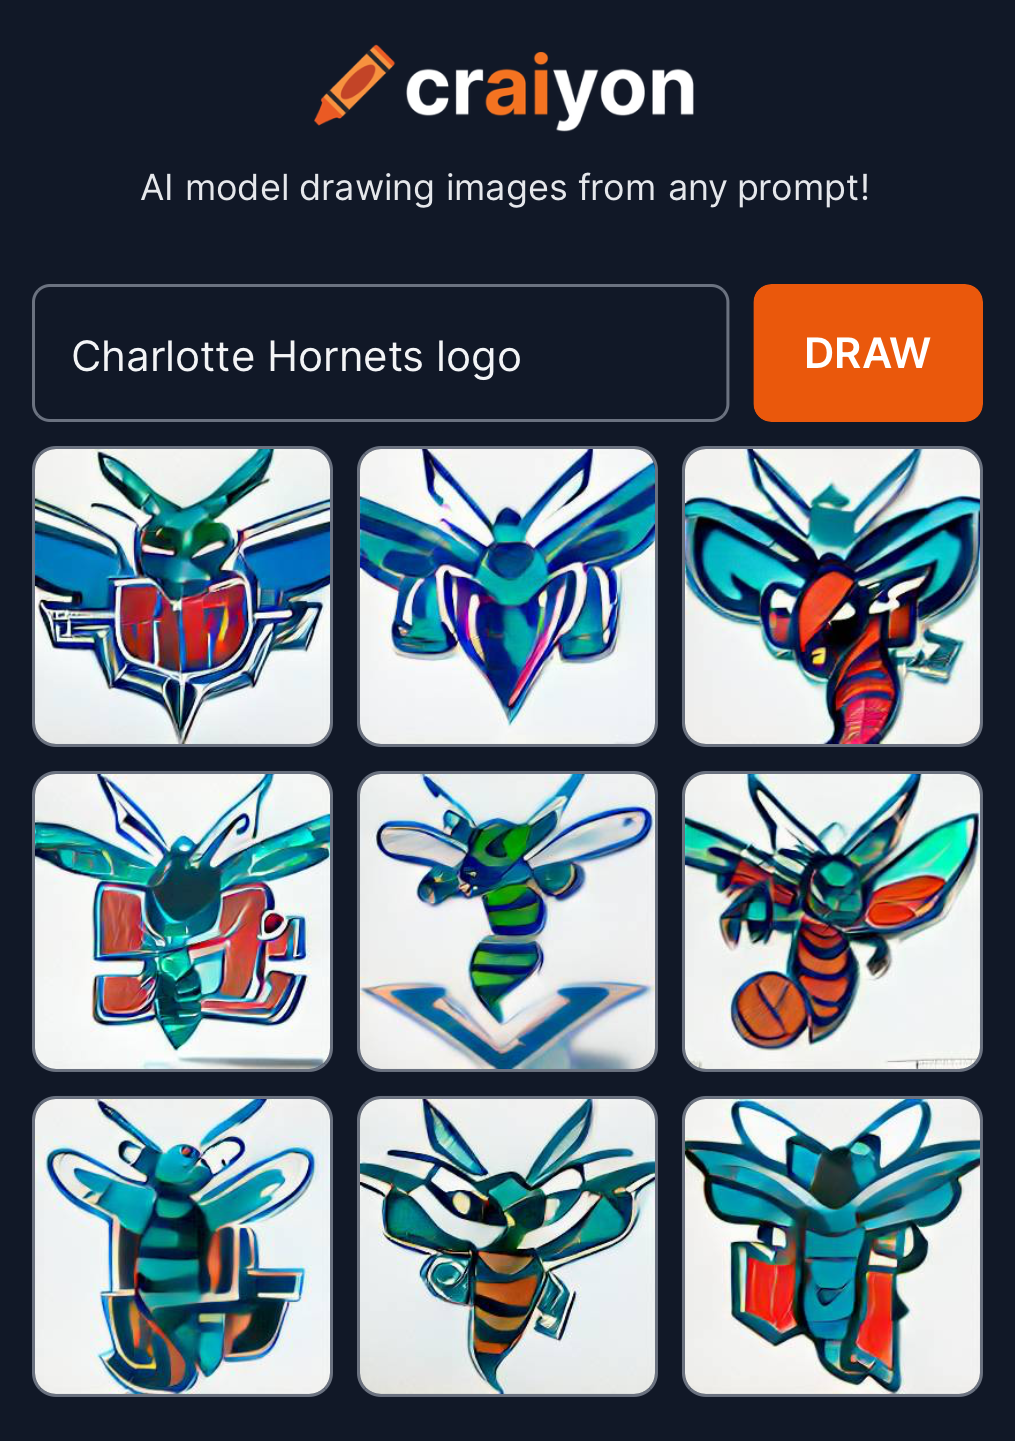 How Digitas Designers Reimagined All Things NBA, From Logos and